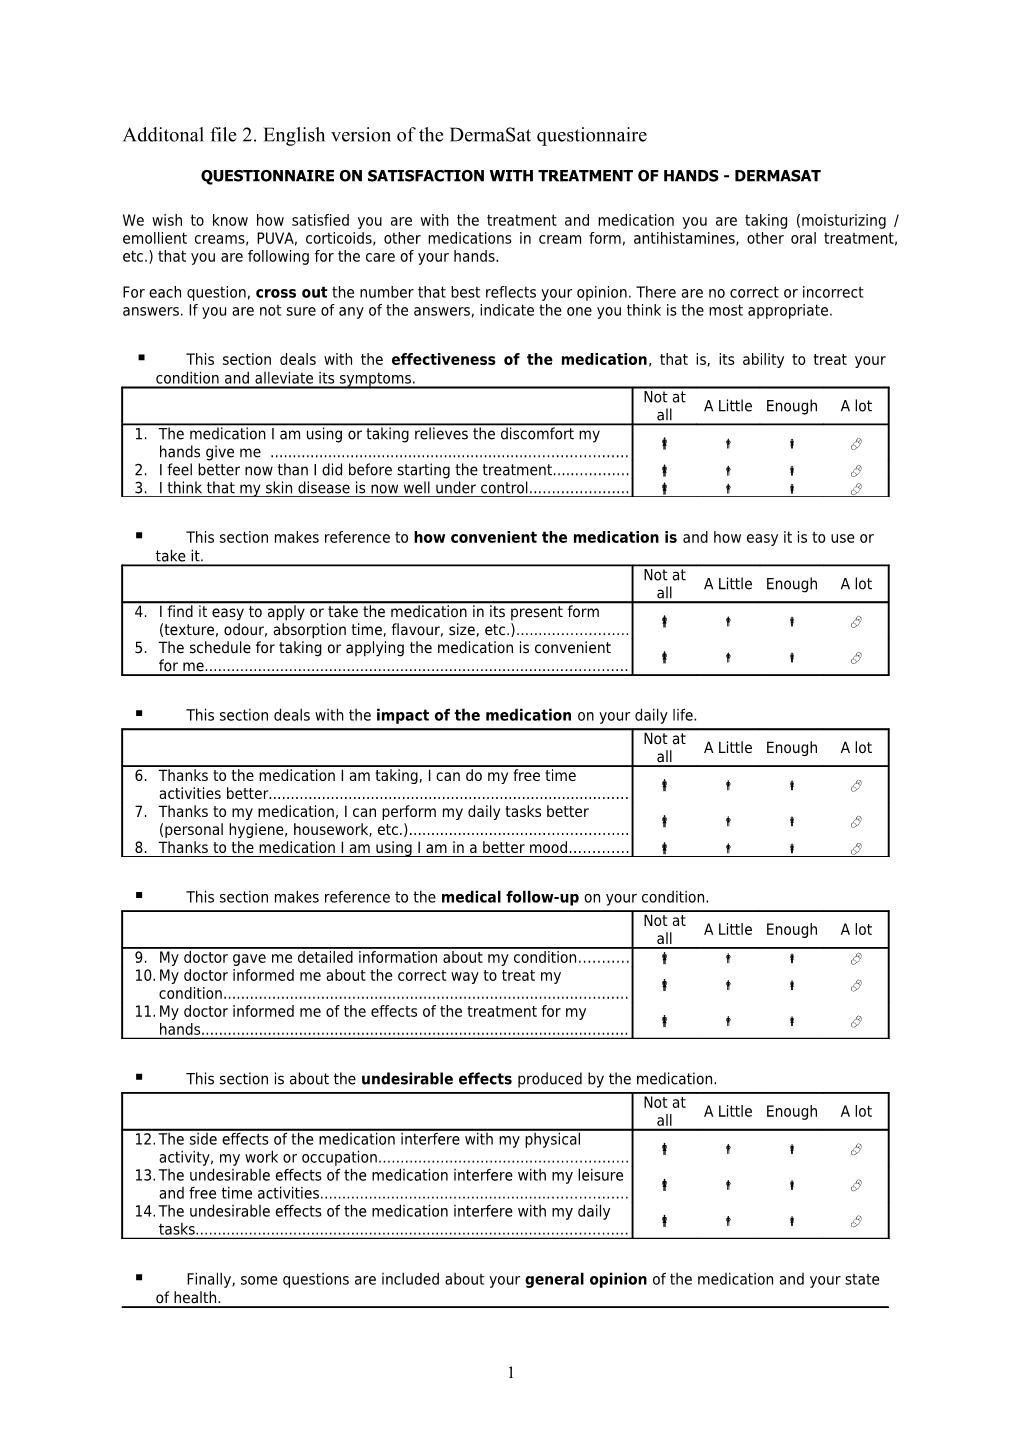 Additonal File 2. English Version of the Dermasat Questionnaire